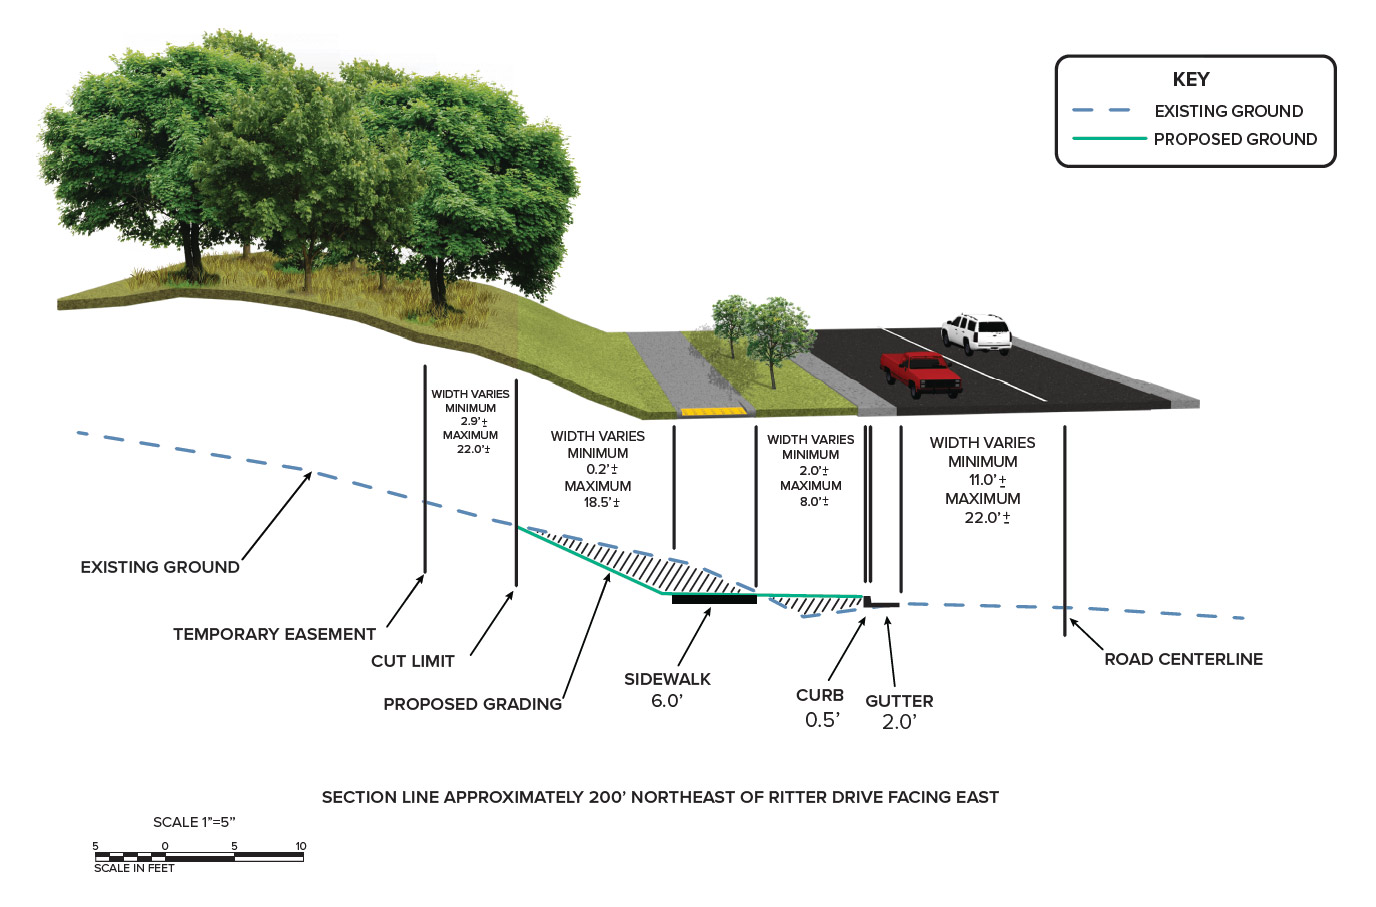 Illustrated image of a typical sidewalk section shows the profile view of the section elevation. From left to right, the illustration depicts mature trees and grass over the existing ground and overhanging the temporary easement area on a downward slope. The lower portion of the slope will be graded to be slightly more steep to meet the sidewalk elevation. Beside the grading, there is a six-foot sidewalk with an accessibility ramp, bordered on the right by a grass median with trees. The curb and gutter area is shown next to the road. The line graph beneath the illustration of the typical section depicts the difference between the existing and proposed ground elevation. The graph shows vertical lines, which divide different areas of the section that provides the range of measurements in each area that will be as part of project design. From left to right, the different areas include temporary easement, cut limit, sidewalk, curb, gutter, and road centerline.